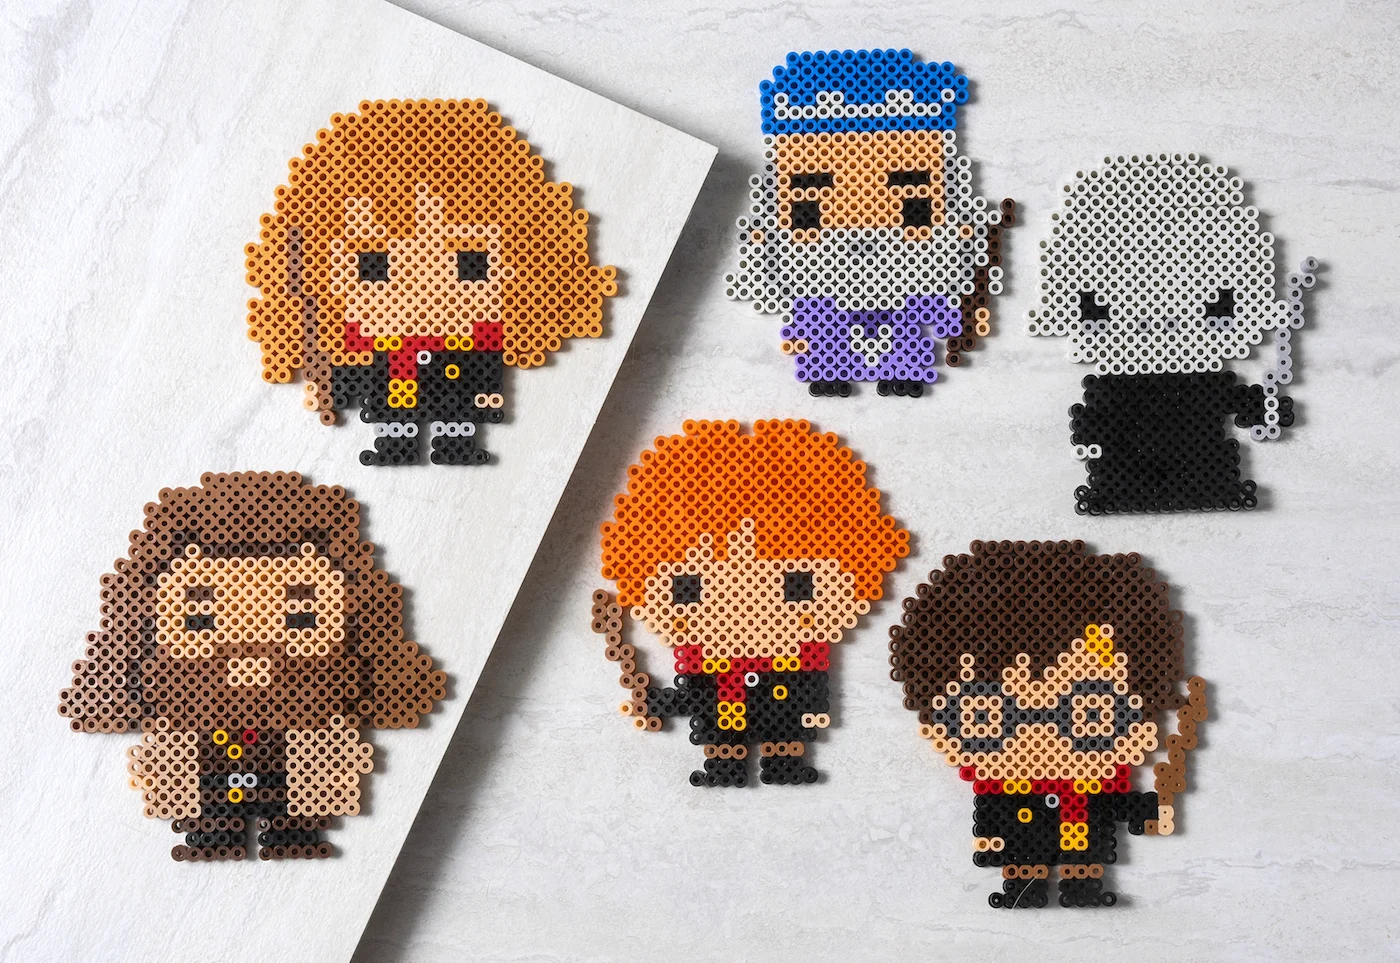 Some Perler beads my mom made : r/harrypotter